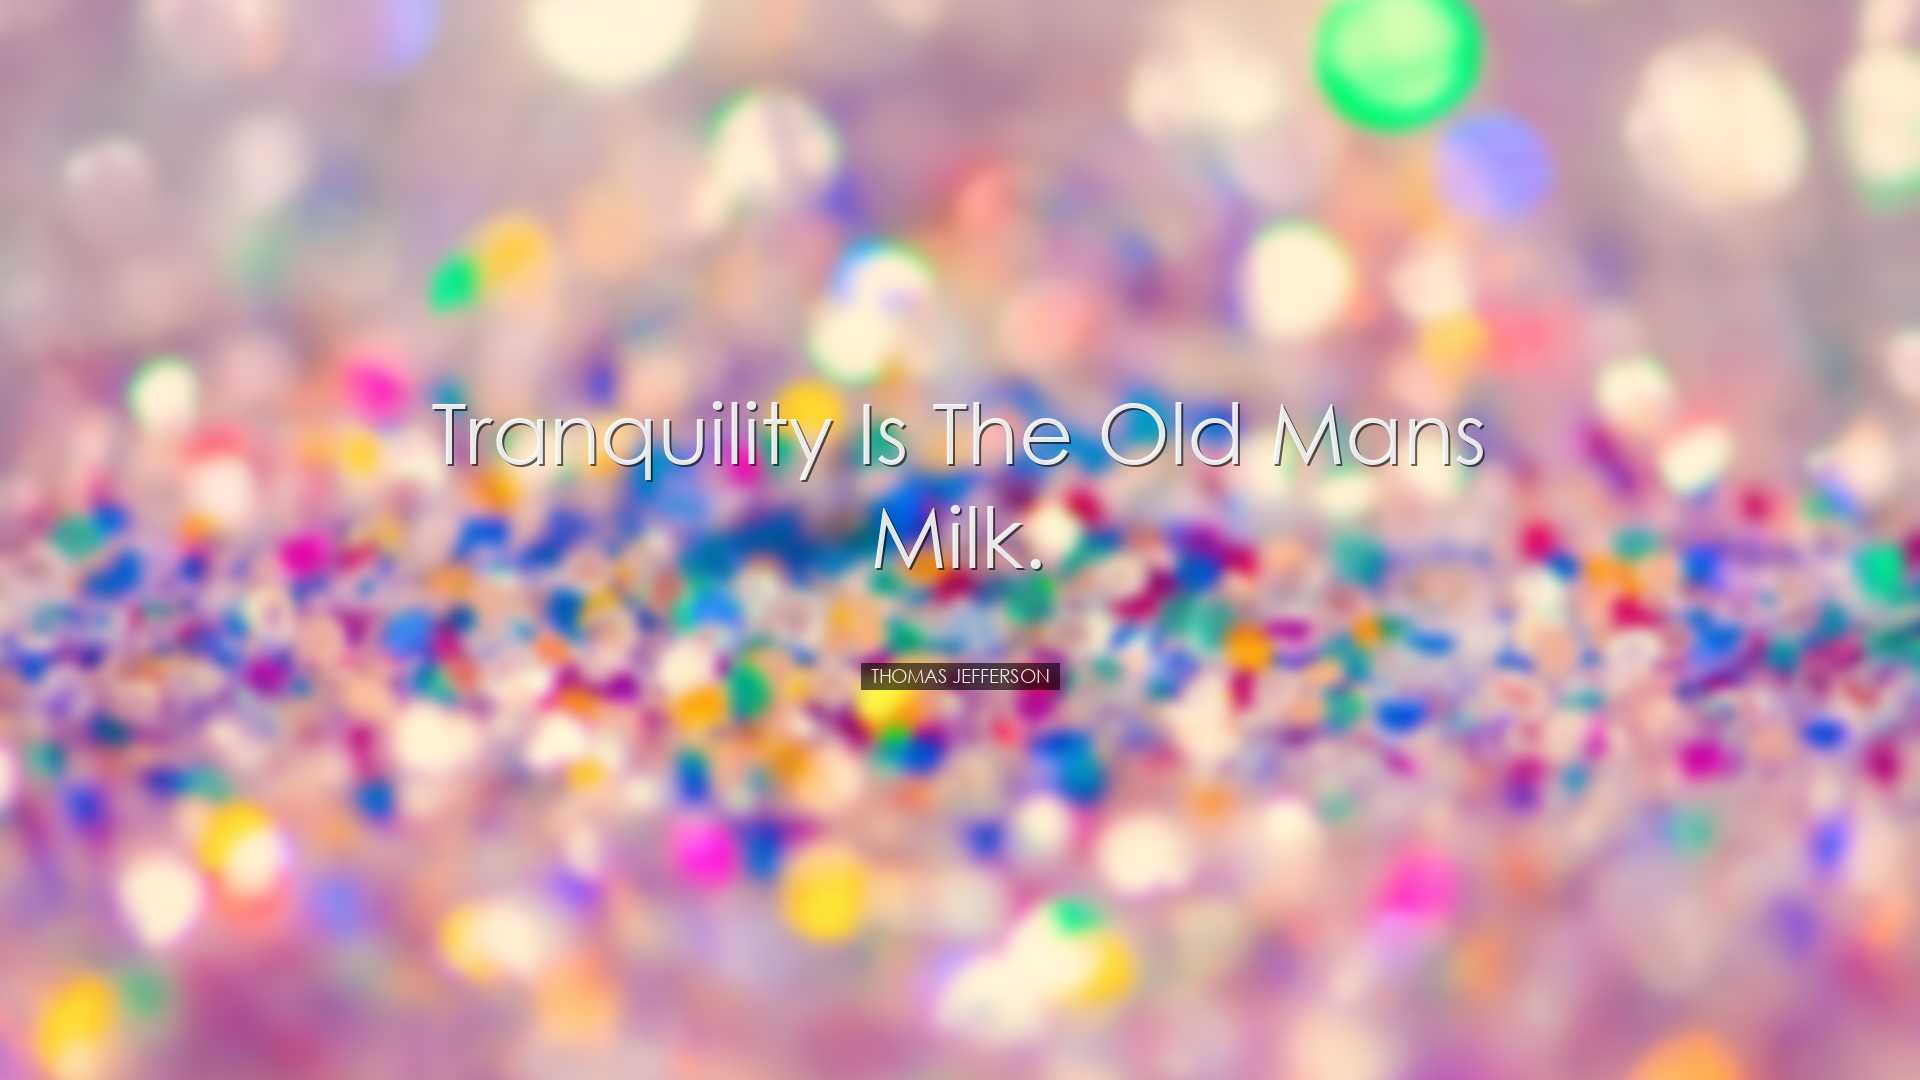 Tranquility is the old mans milk. - Thomas Jefferson